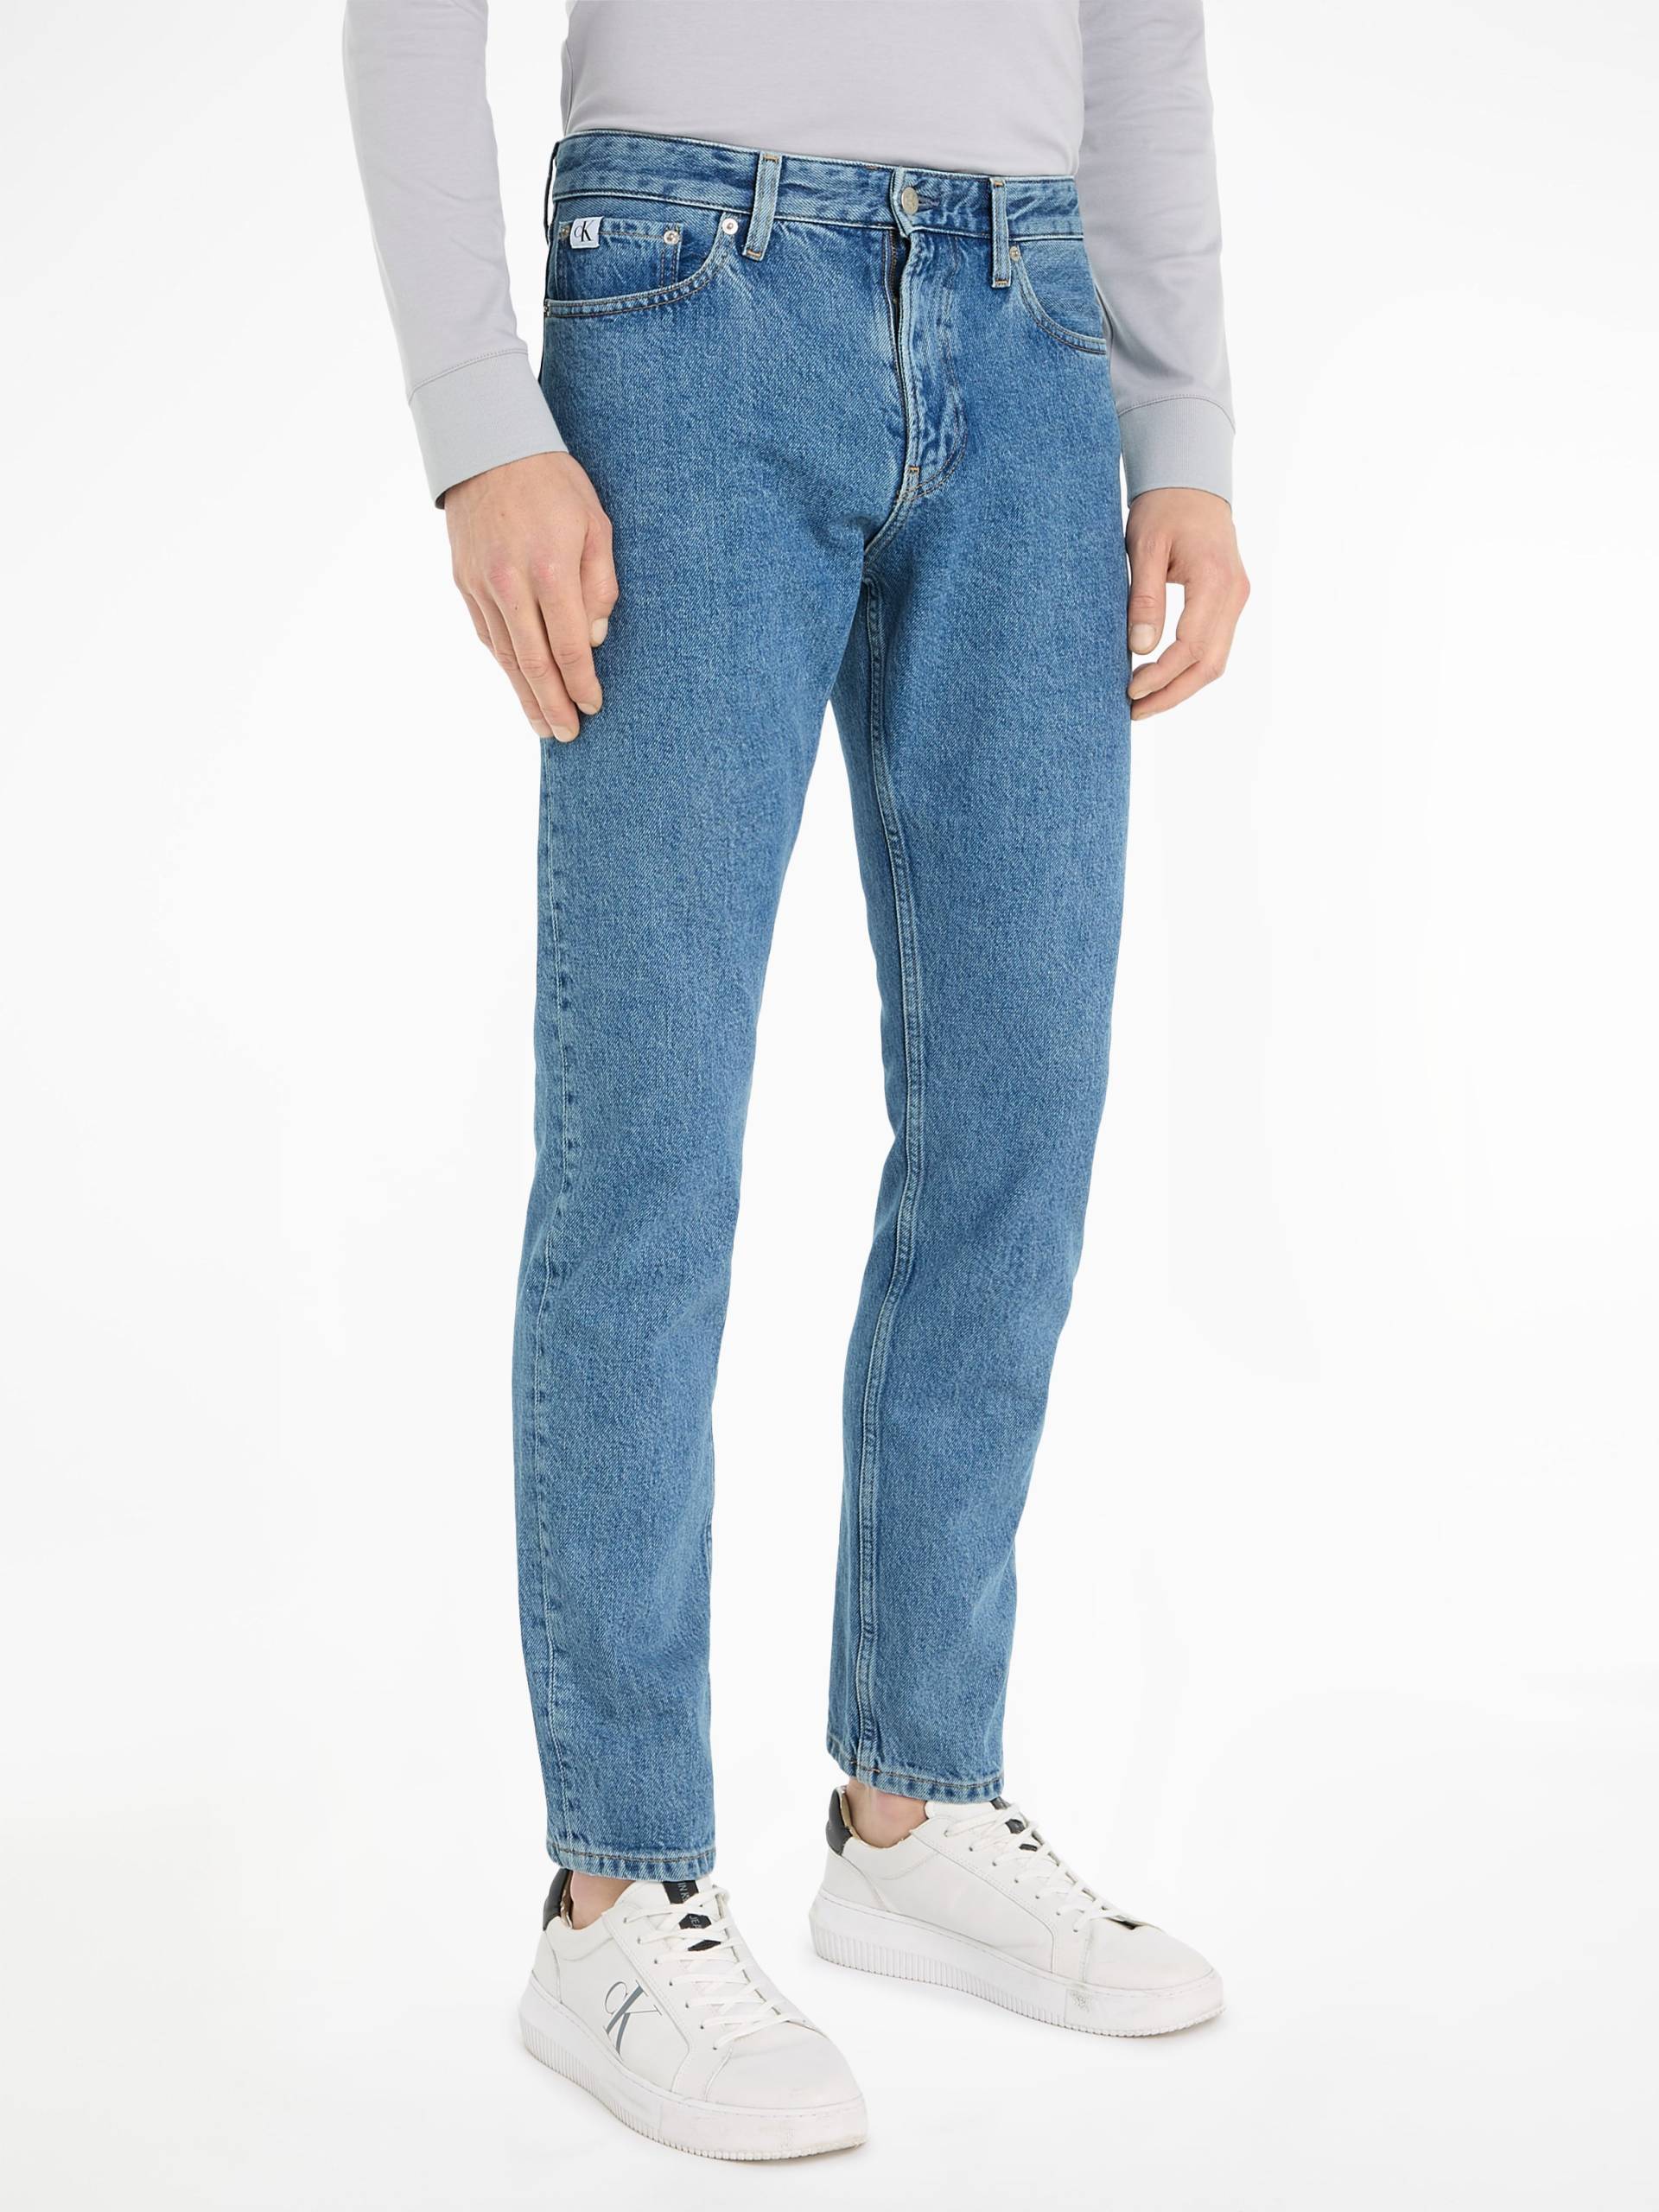 Calvin Klein Jeans Straight-Jeans »AUTHENTIC STRAIGHT« von Calvin Klein Jeans